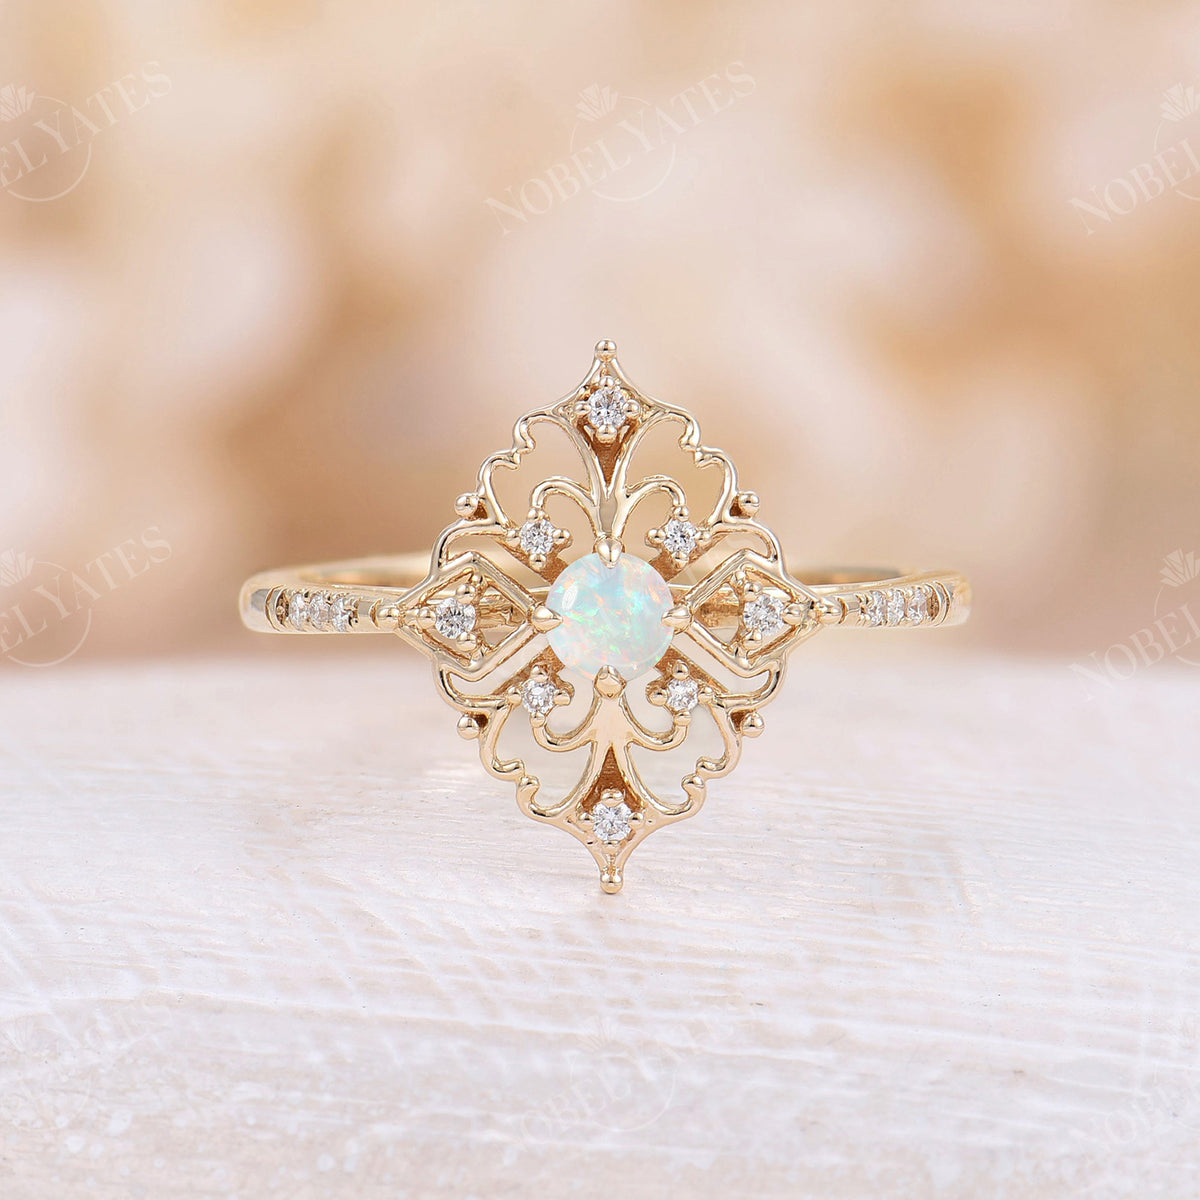 Vintage Round White Opal Filigree Engagement Ring Yellow Gold